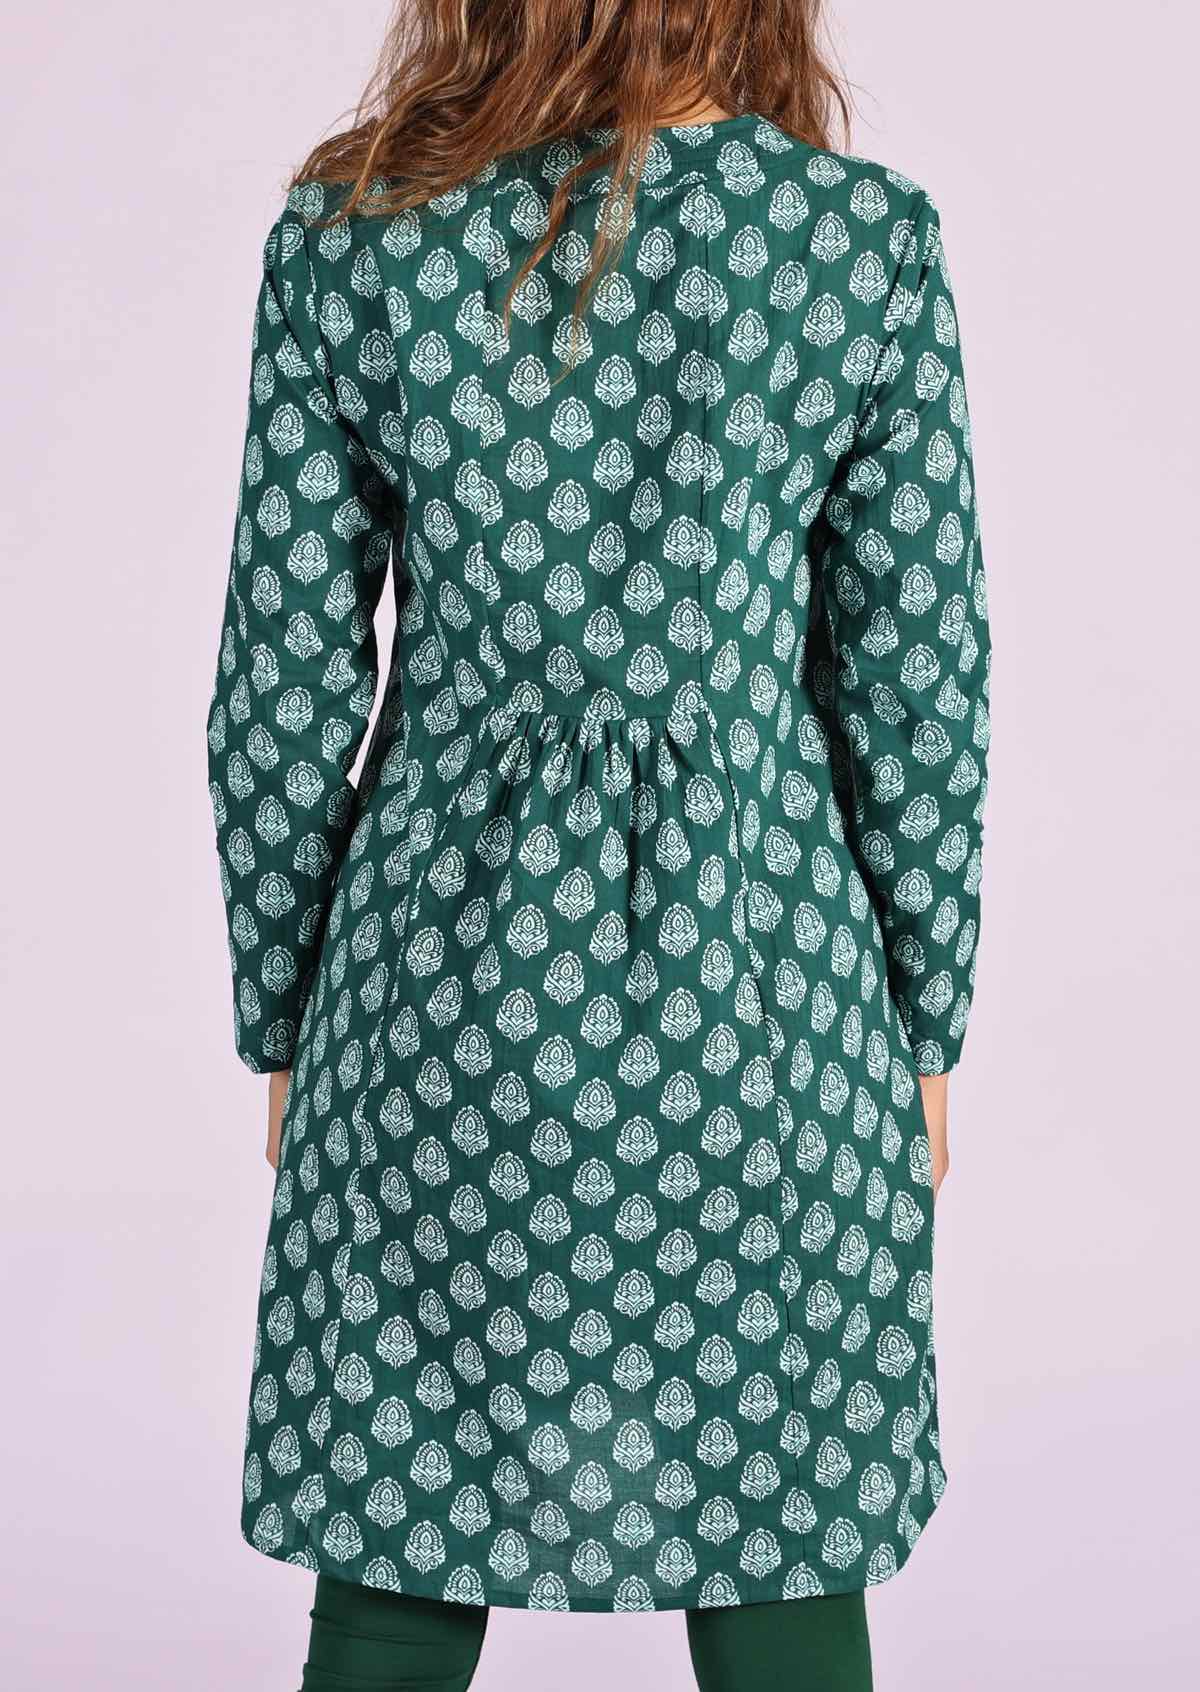 Long sleeve cotton tunic with small gathers, centre mid back